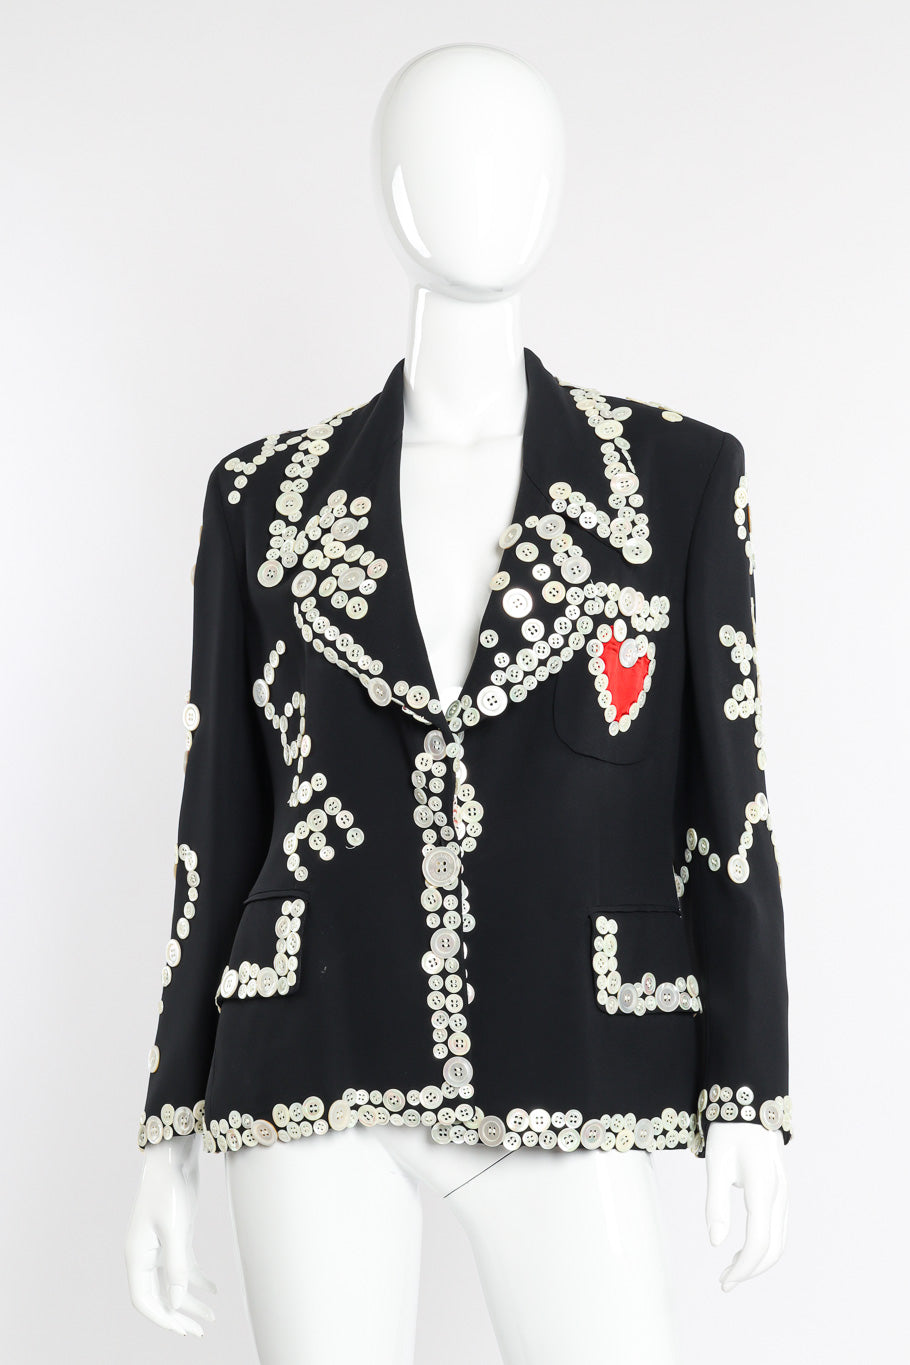 Vintage Moschino Mother of Pearl Button Blazer front view on mannequin @Recessla